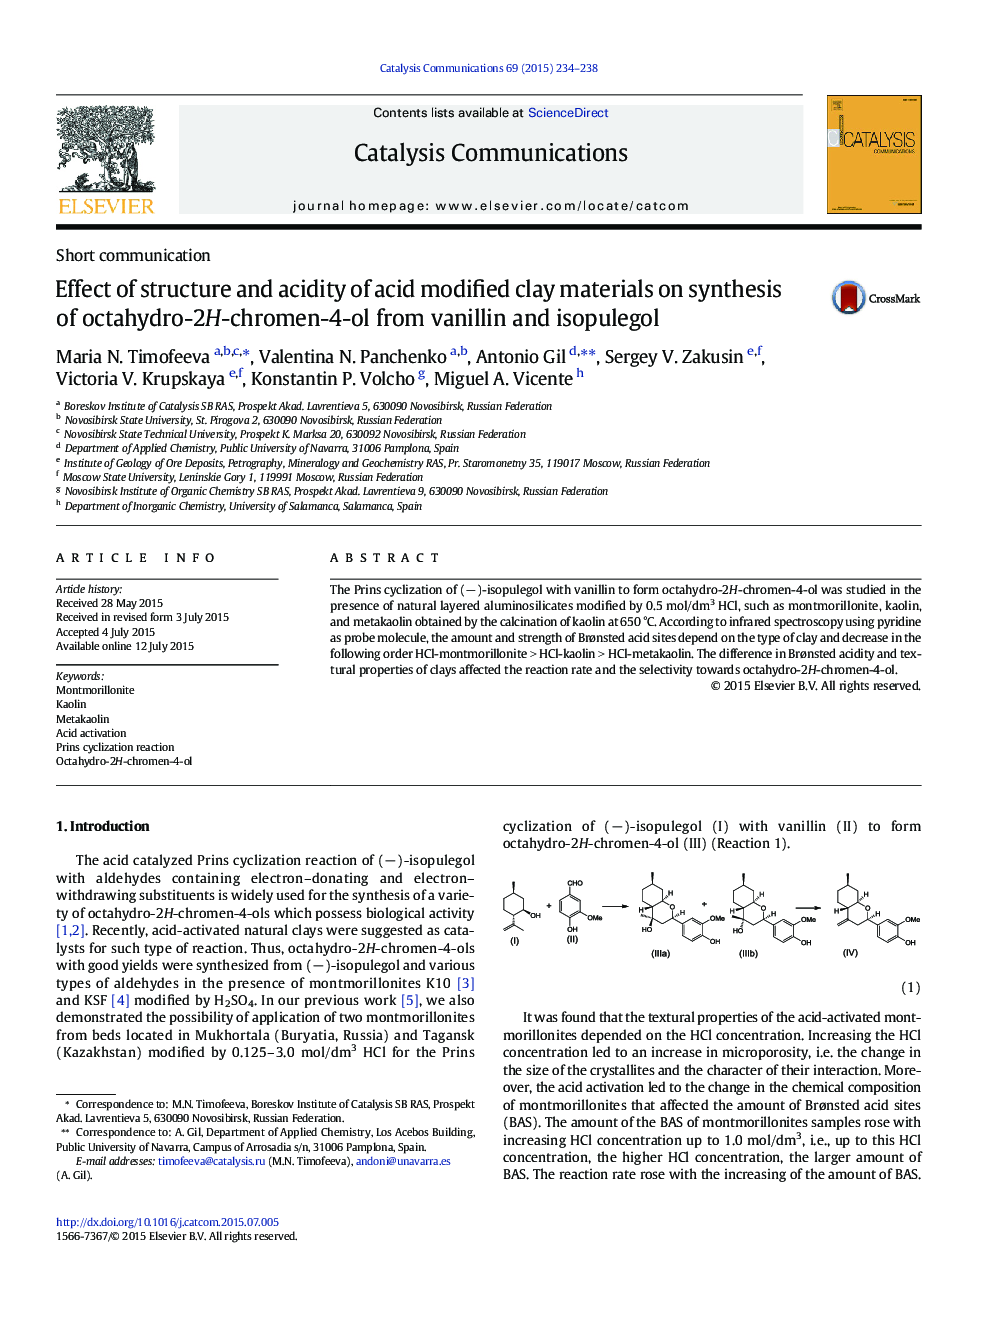 Effect of structure and acidity of acid modified clay materials on synthesis of octahydro-2H-chromen-4-ol from vanillin and isopulegol